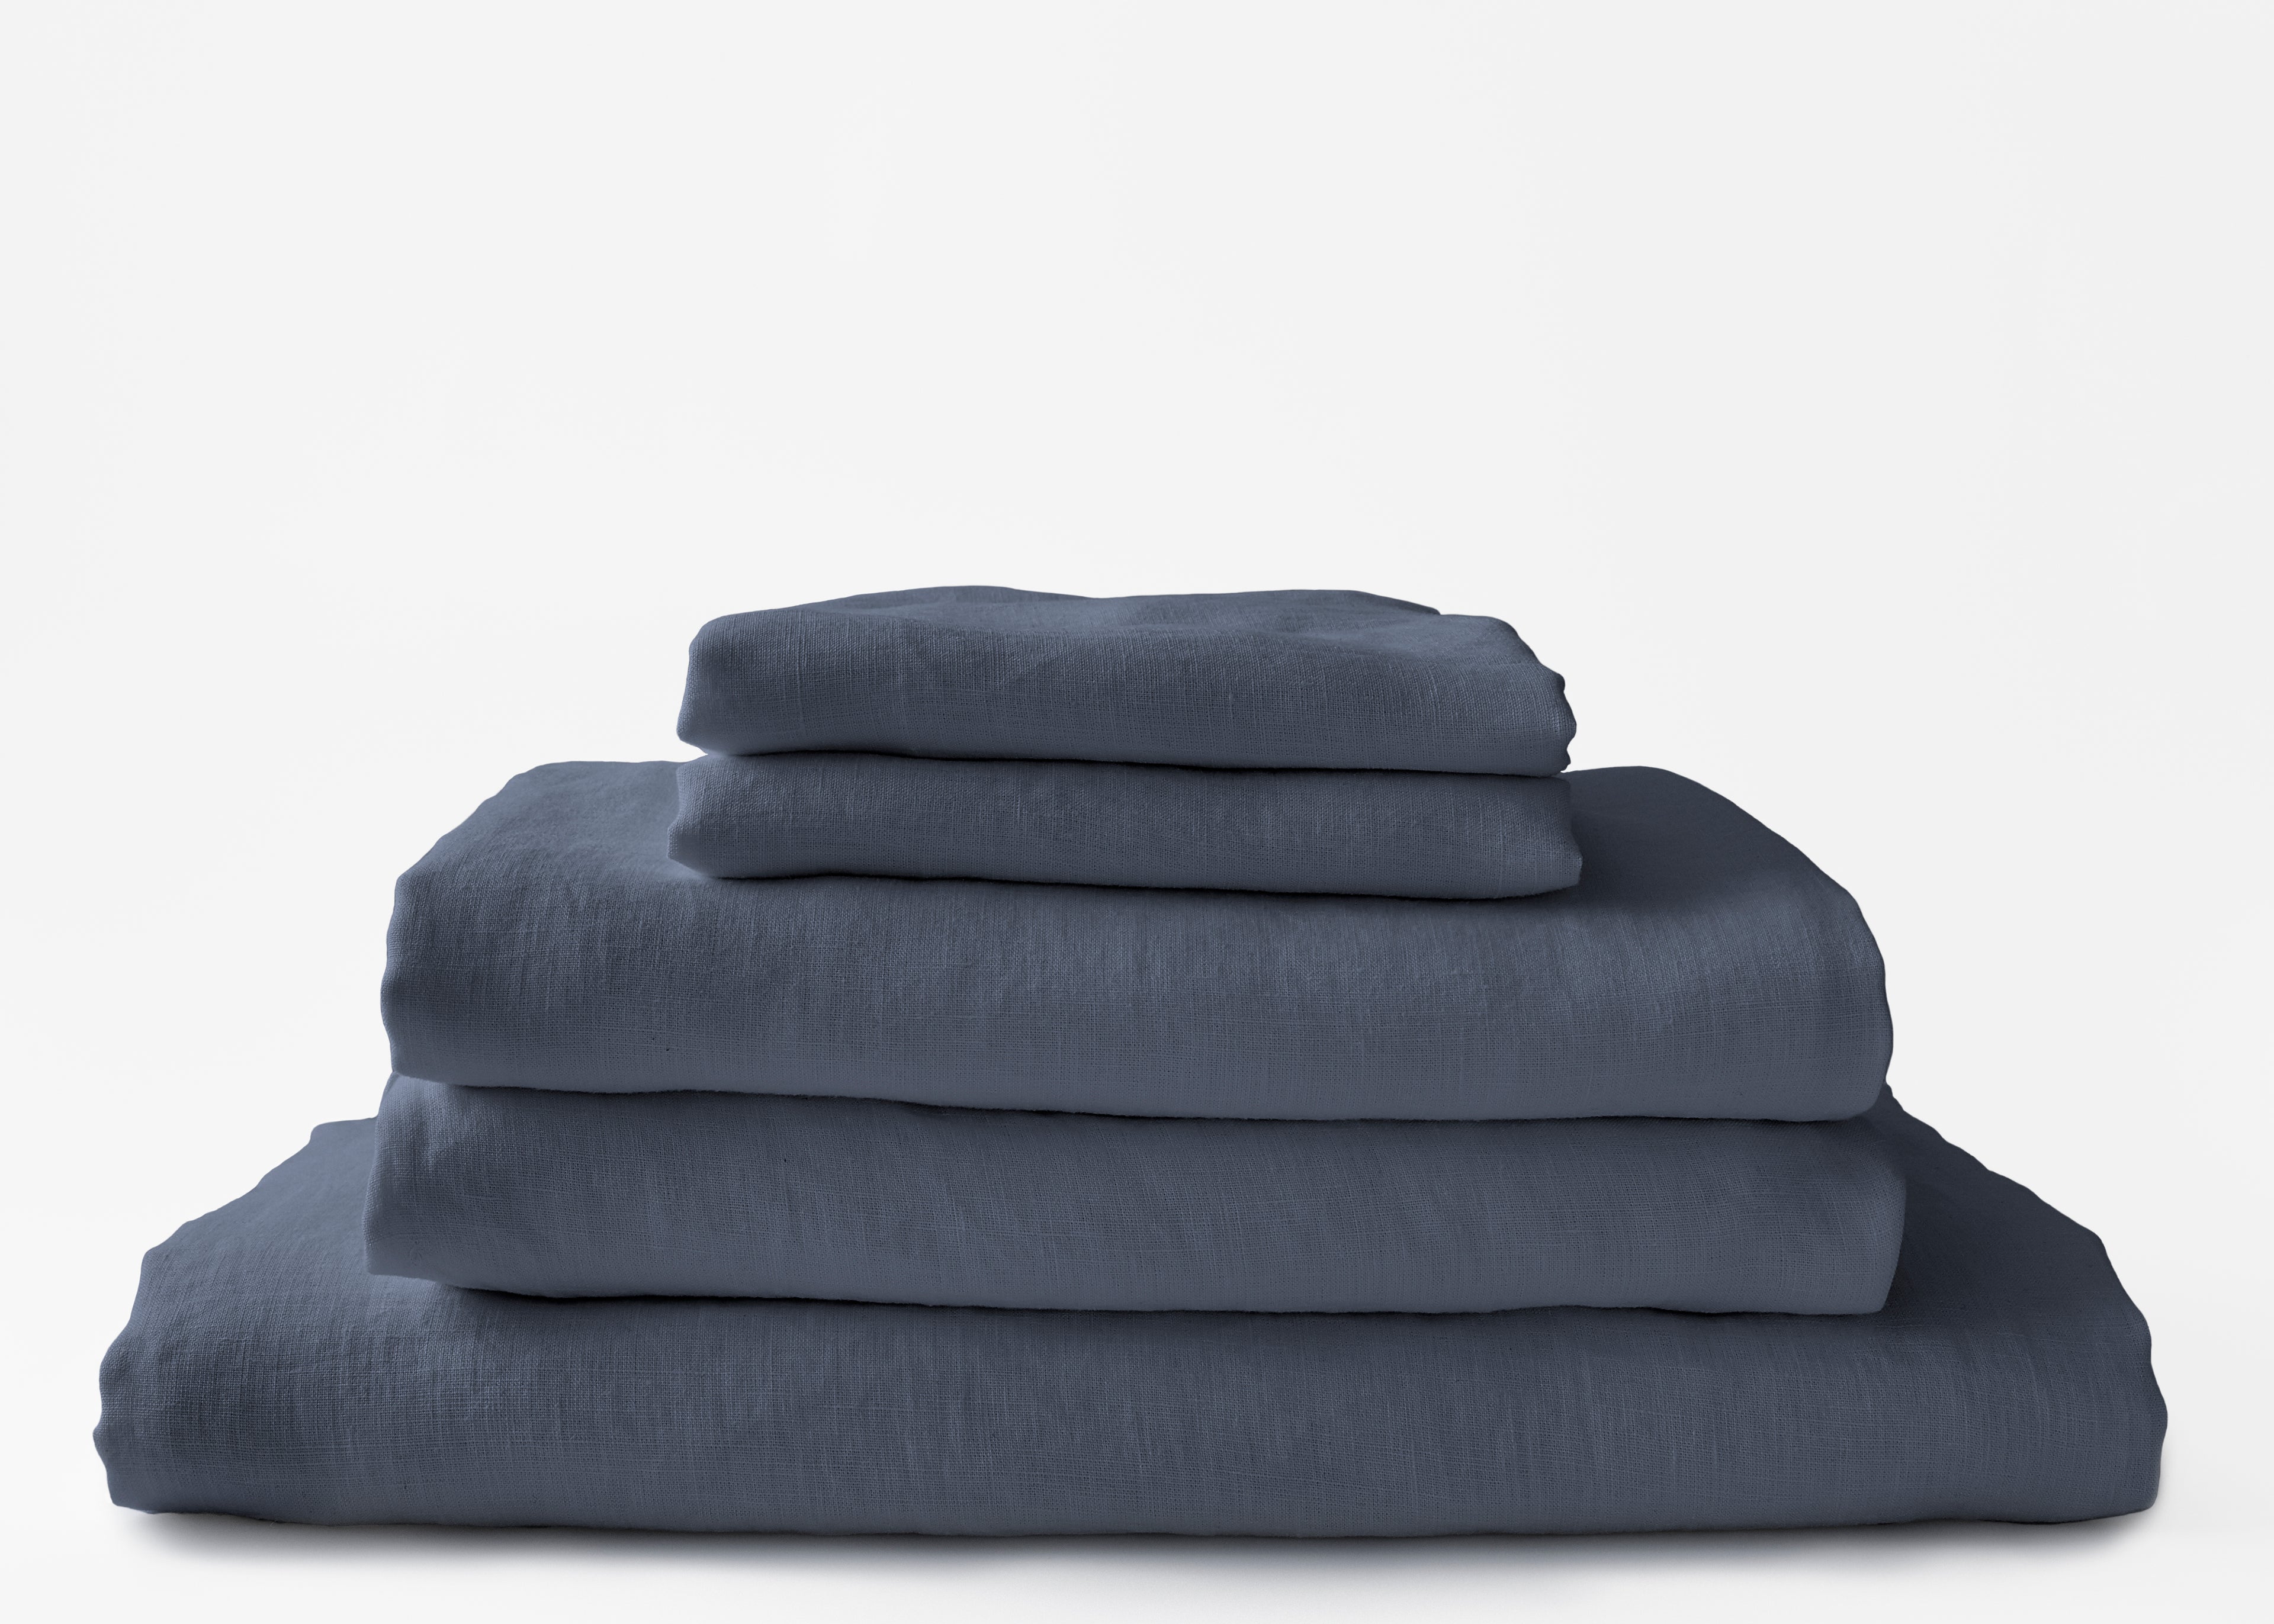 hemp bedding set in a muted navy color